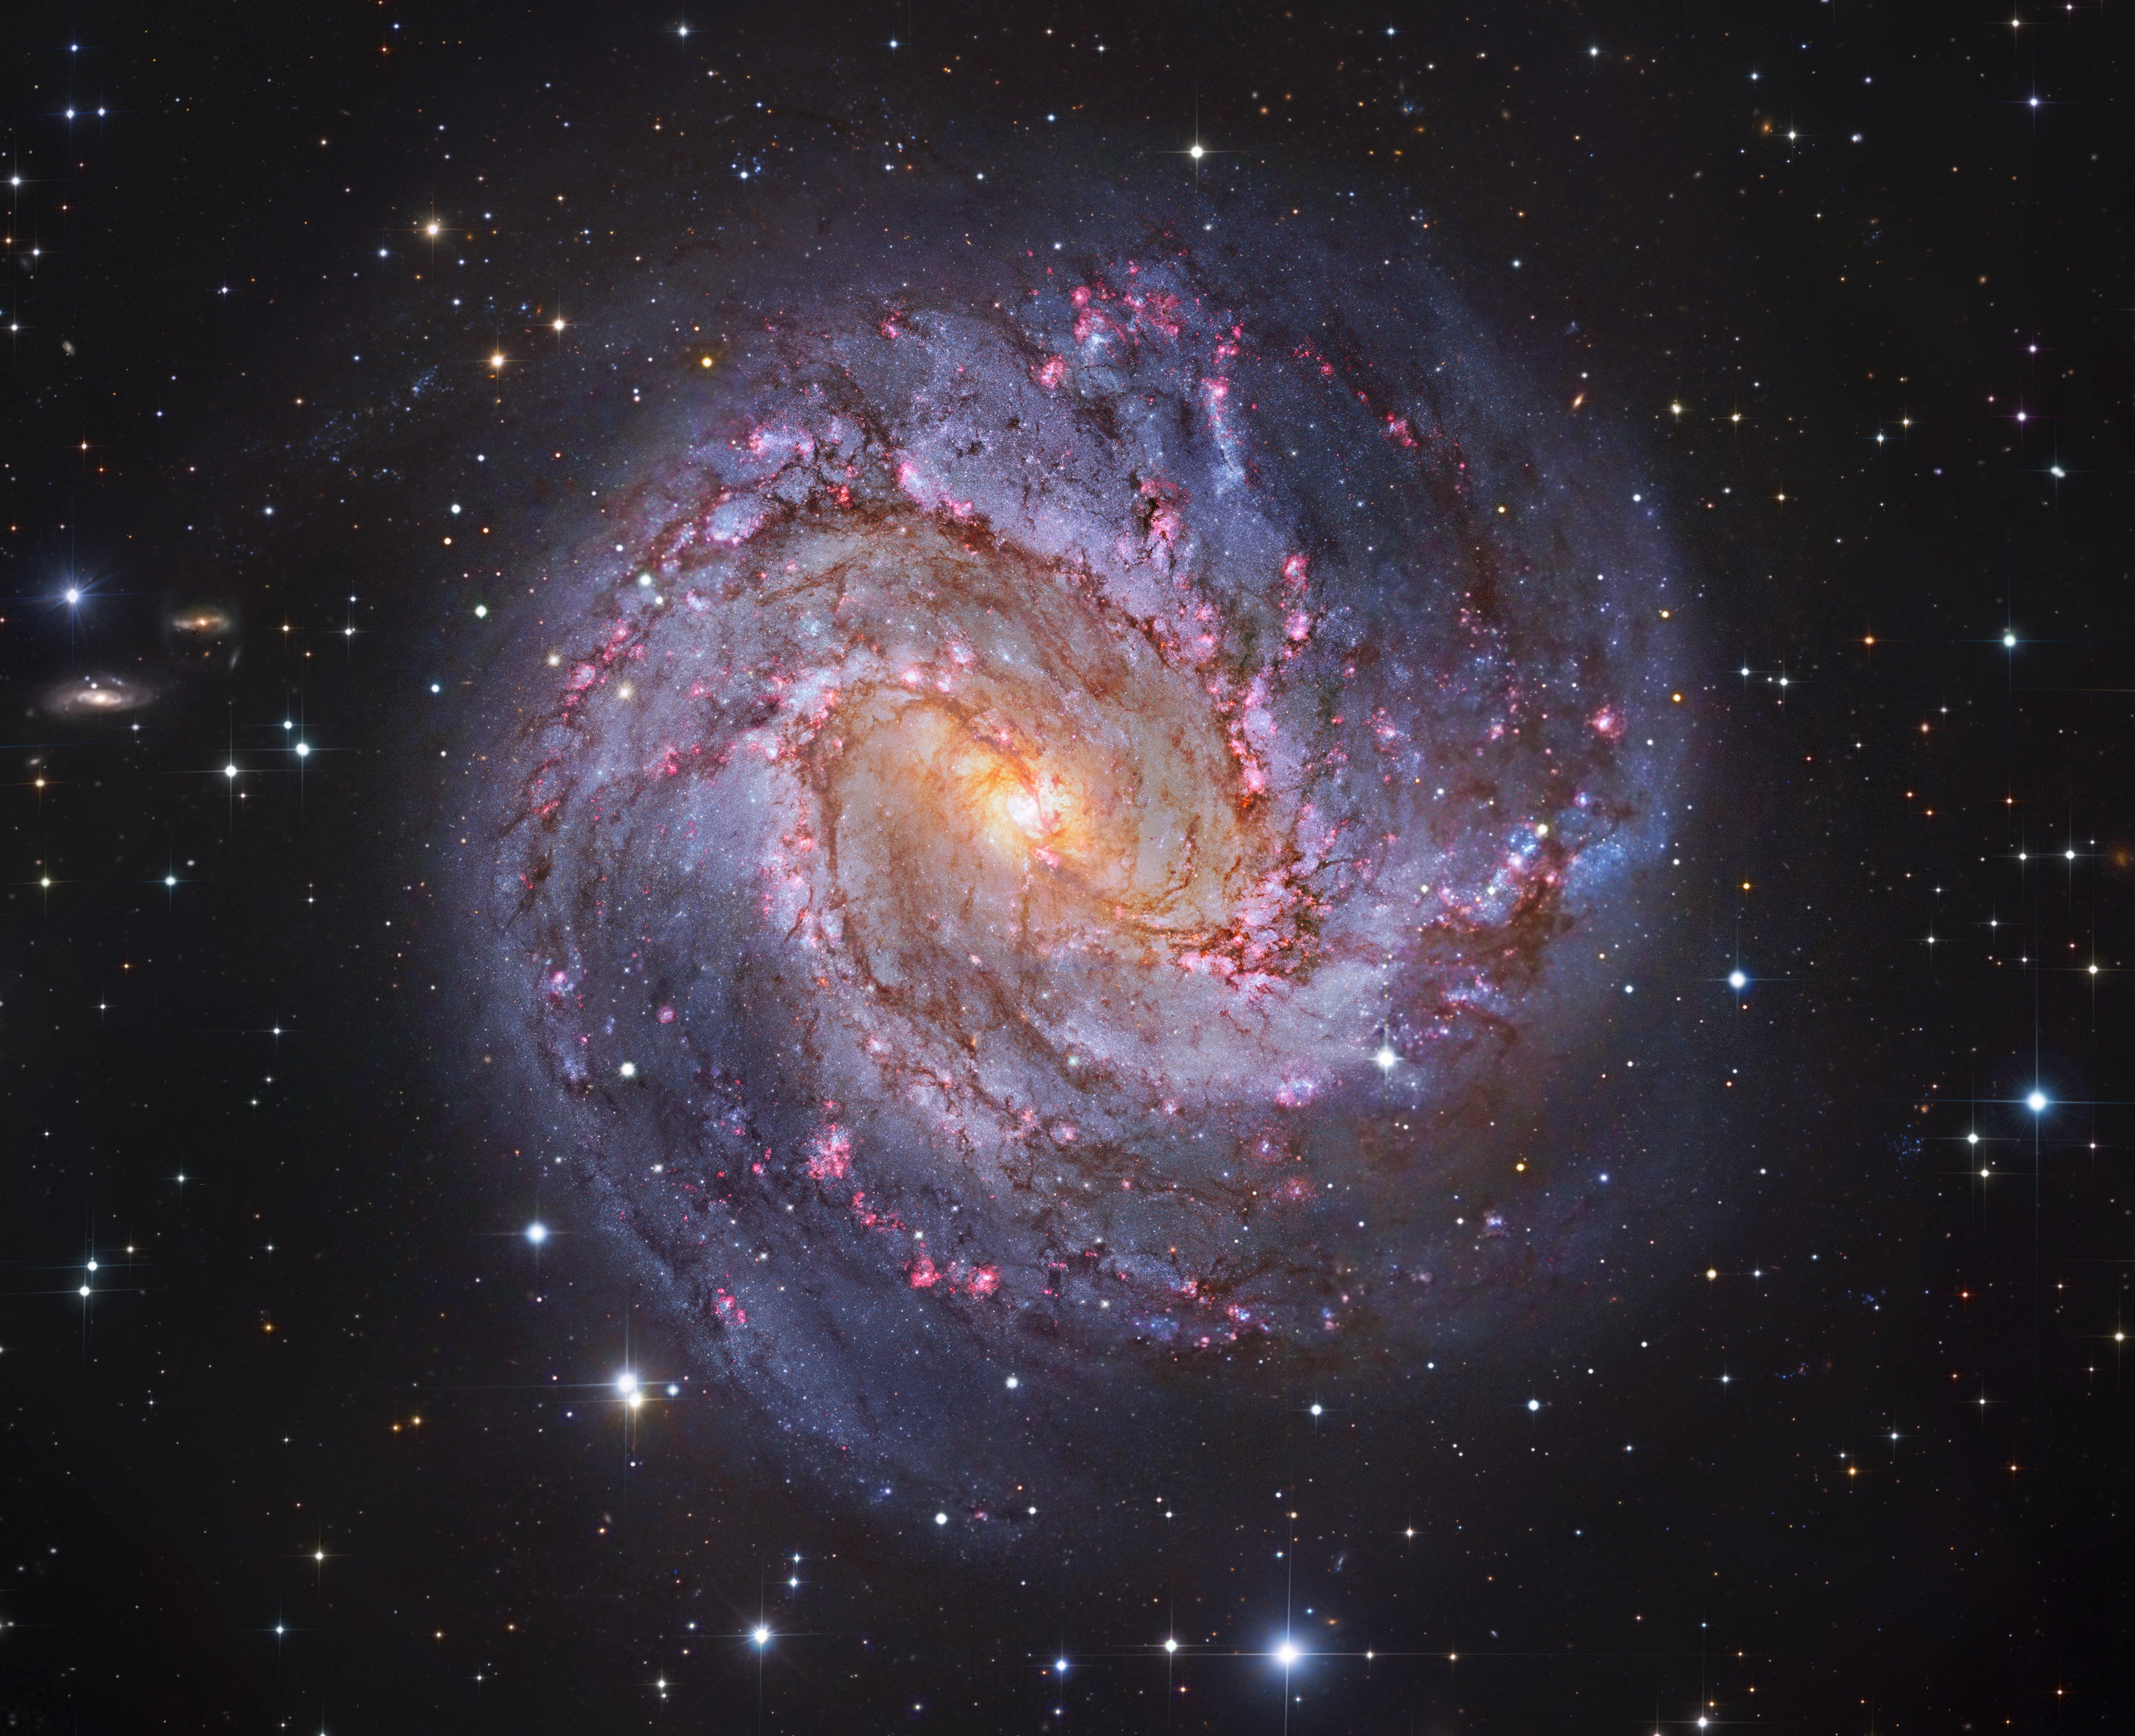 Celebrate NASA Hubble's 30th anniversary, find out what the telescope captured on your birthday!